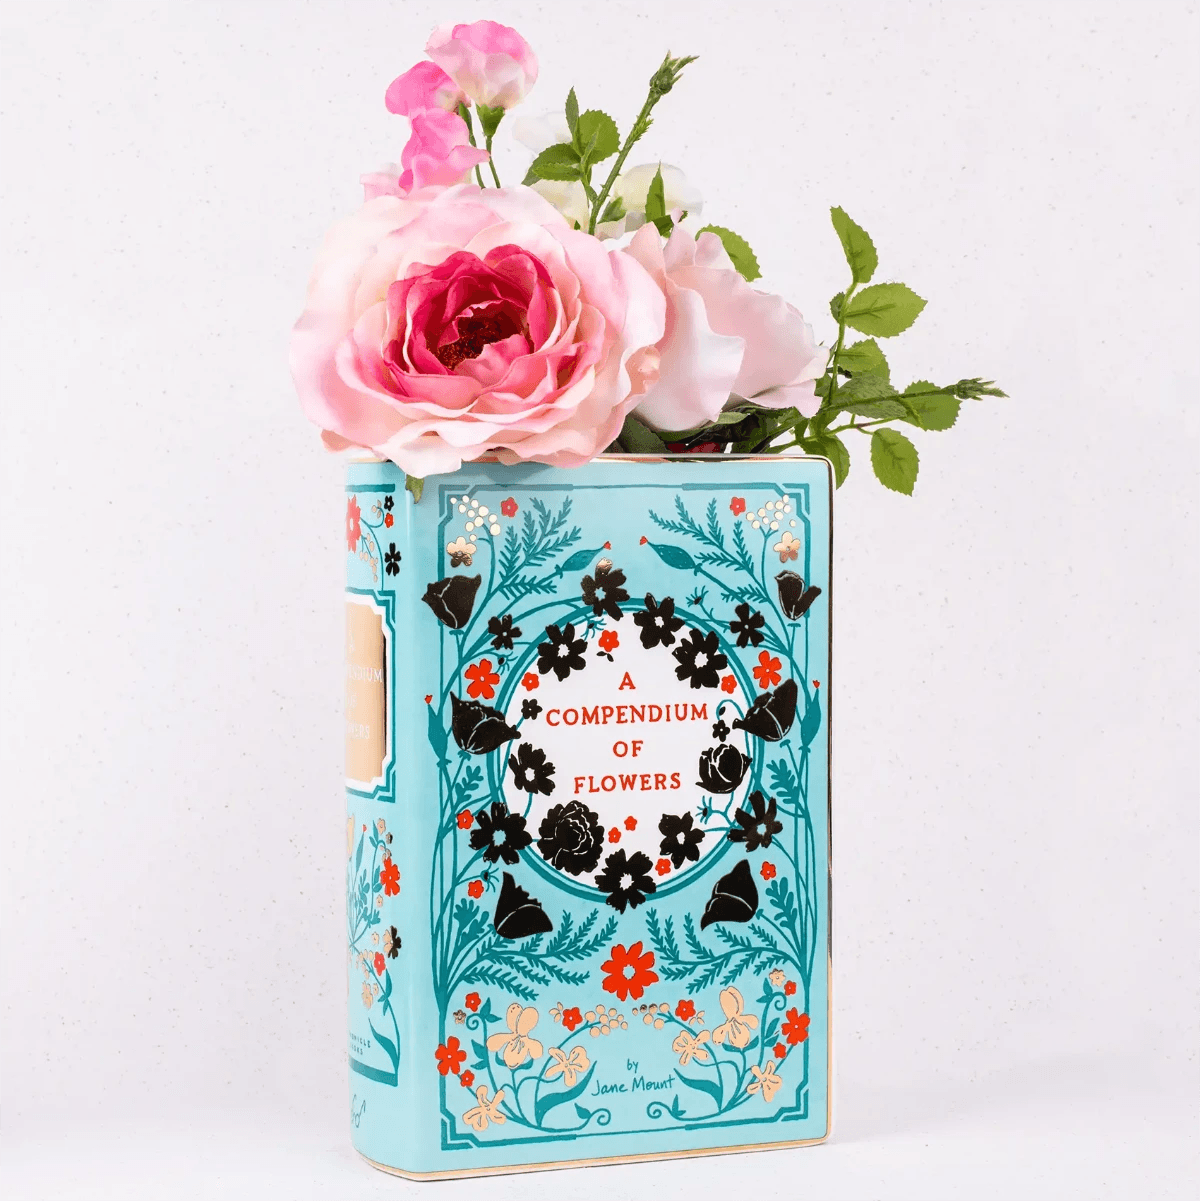 High-quality ceramic.  Includes the Oscar Wilde quote, "With freedom, books, flowers, and the moon, who could not be happy?"